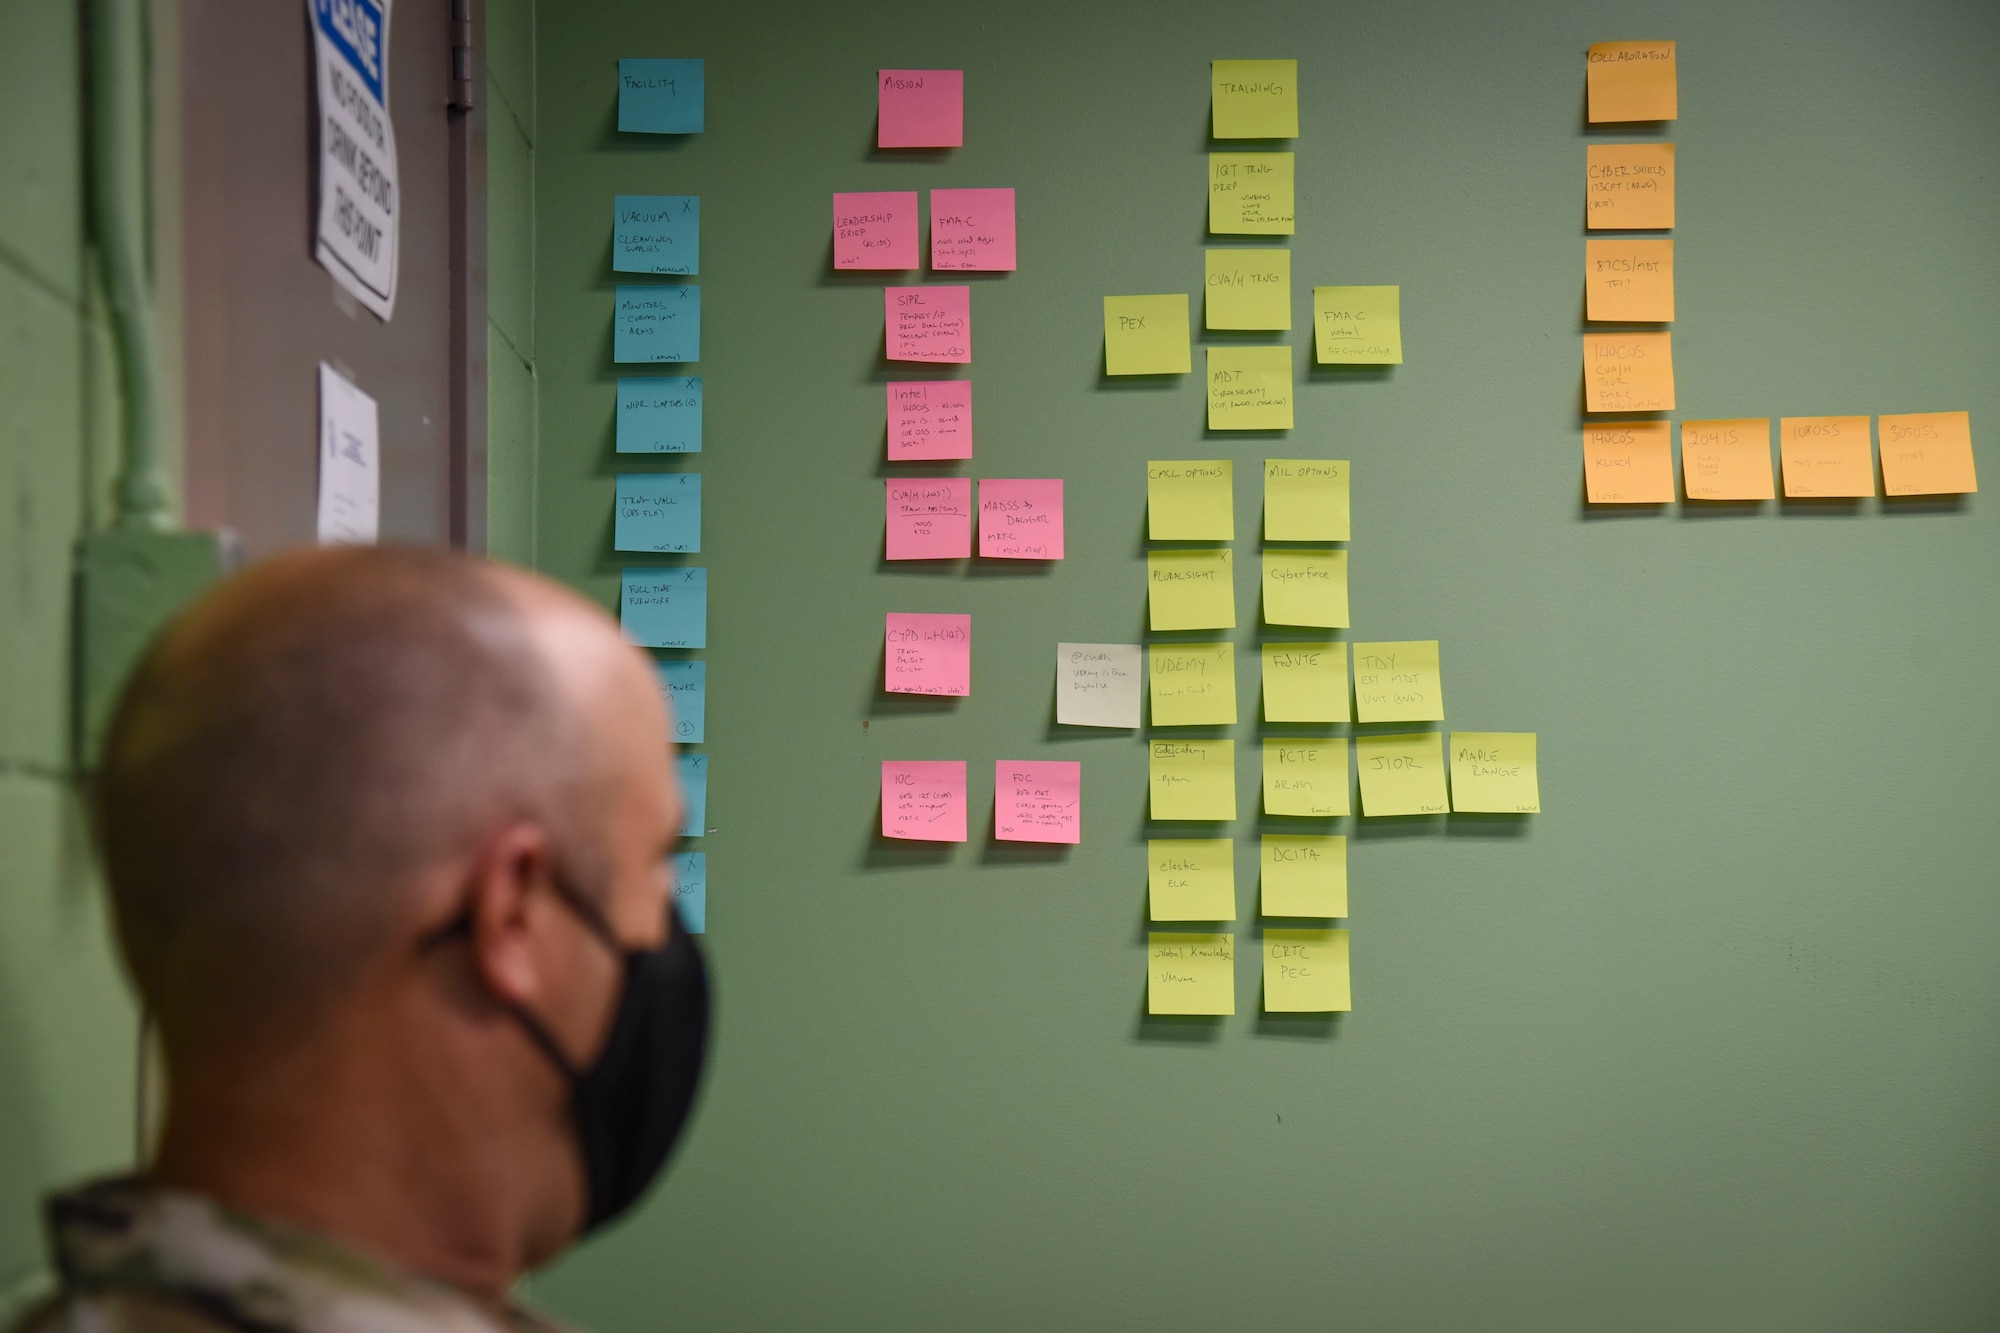 Master Sgt. Christopher Motta, non-commissioned officer-in-charge, 108th Communications Flight/ Mission Defense Team, looks at wall of Post-It notes stuck to the wall. The notes outline the process of standing up the new cyber mission as they become more acquainted with their new work area.